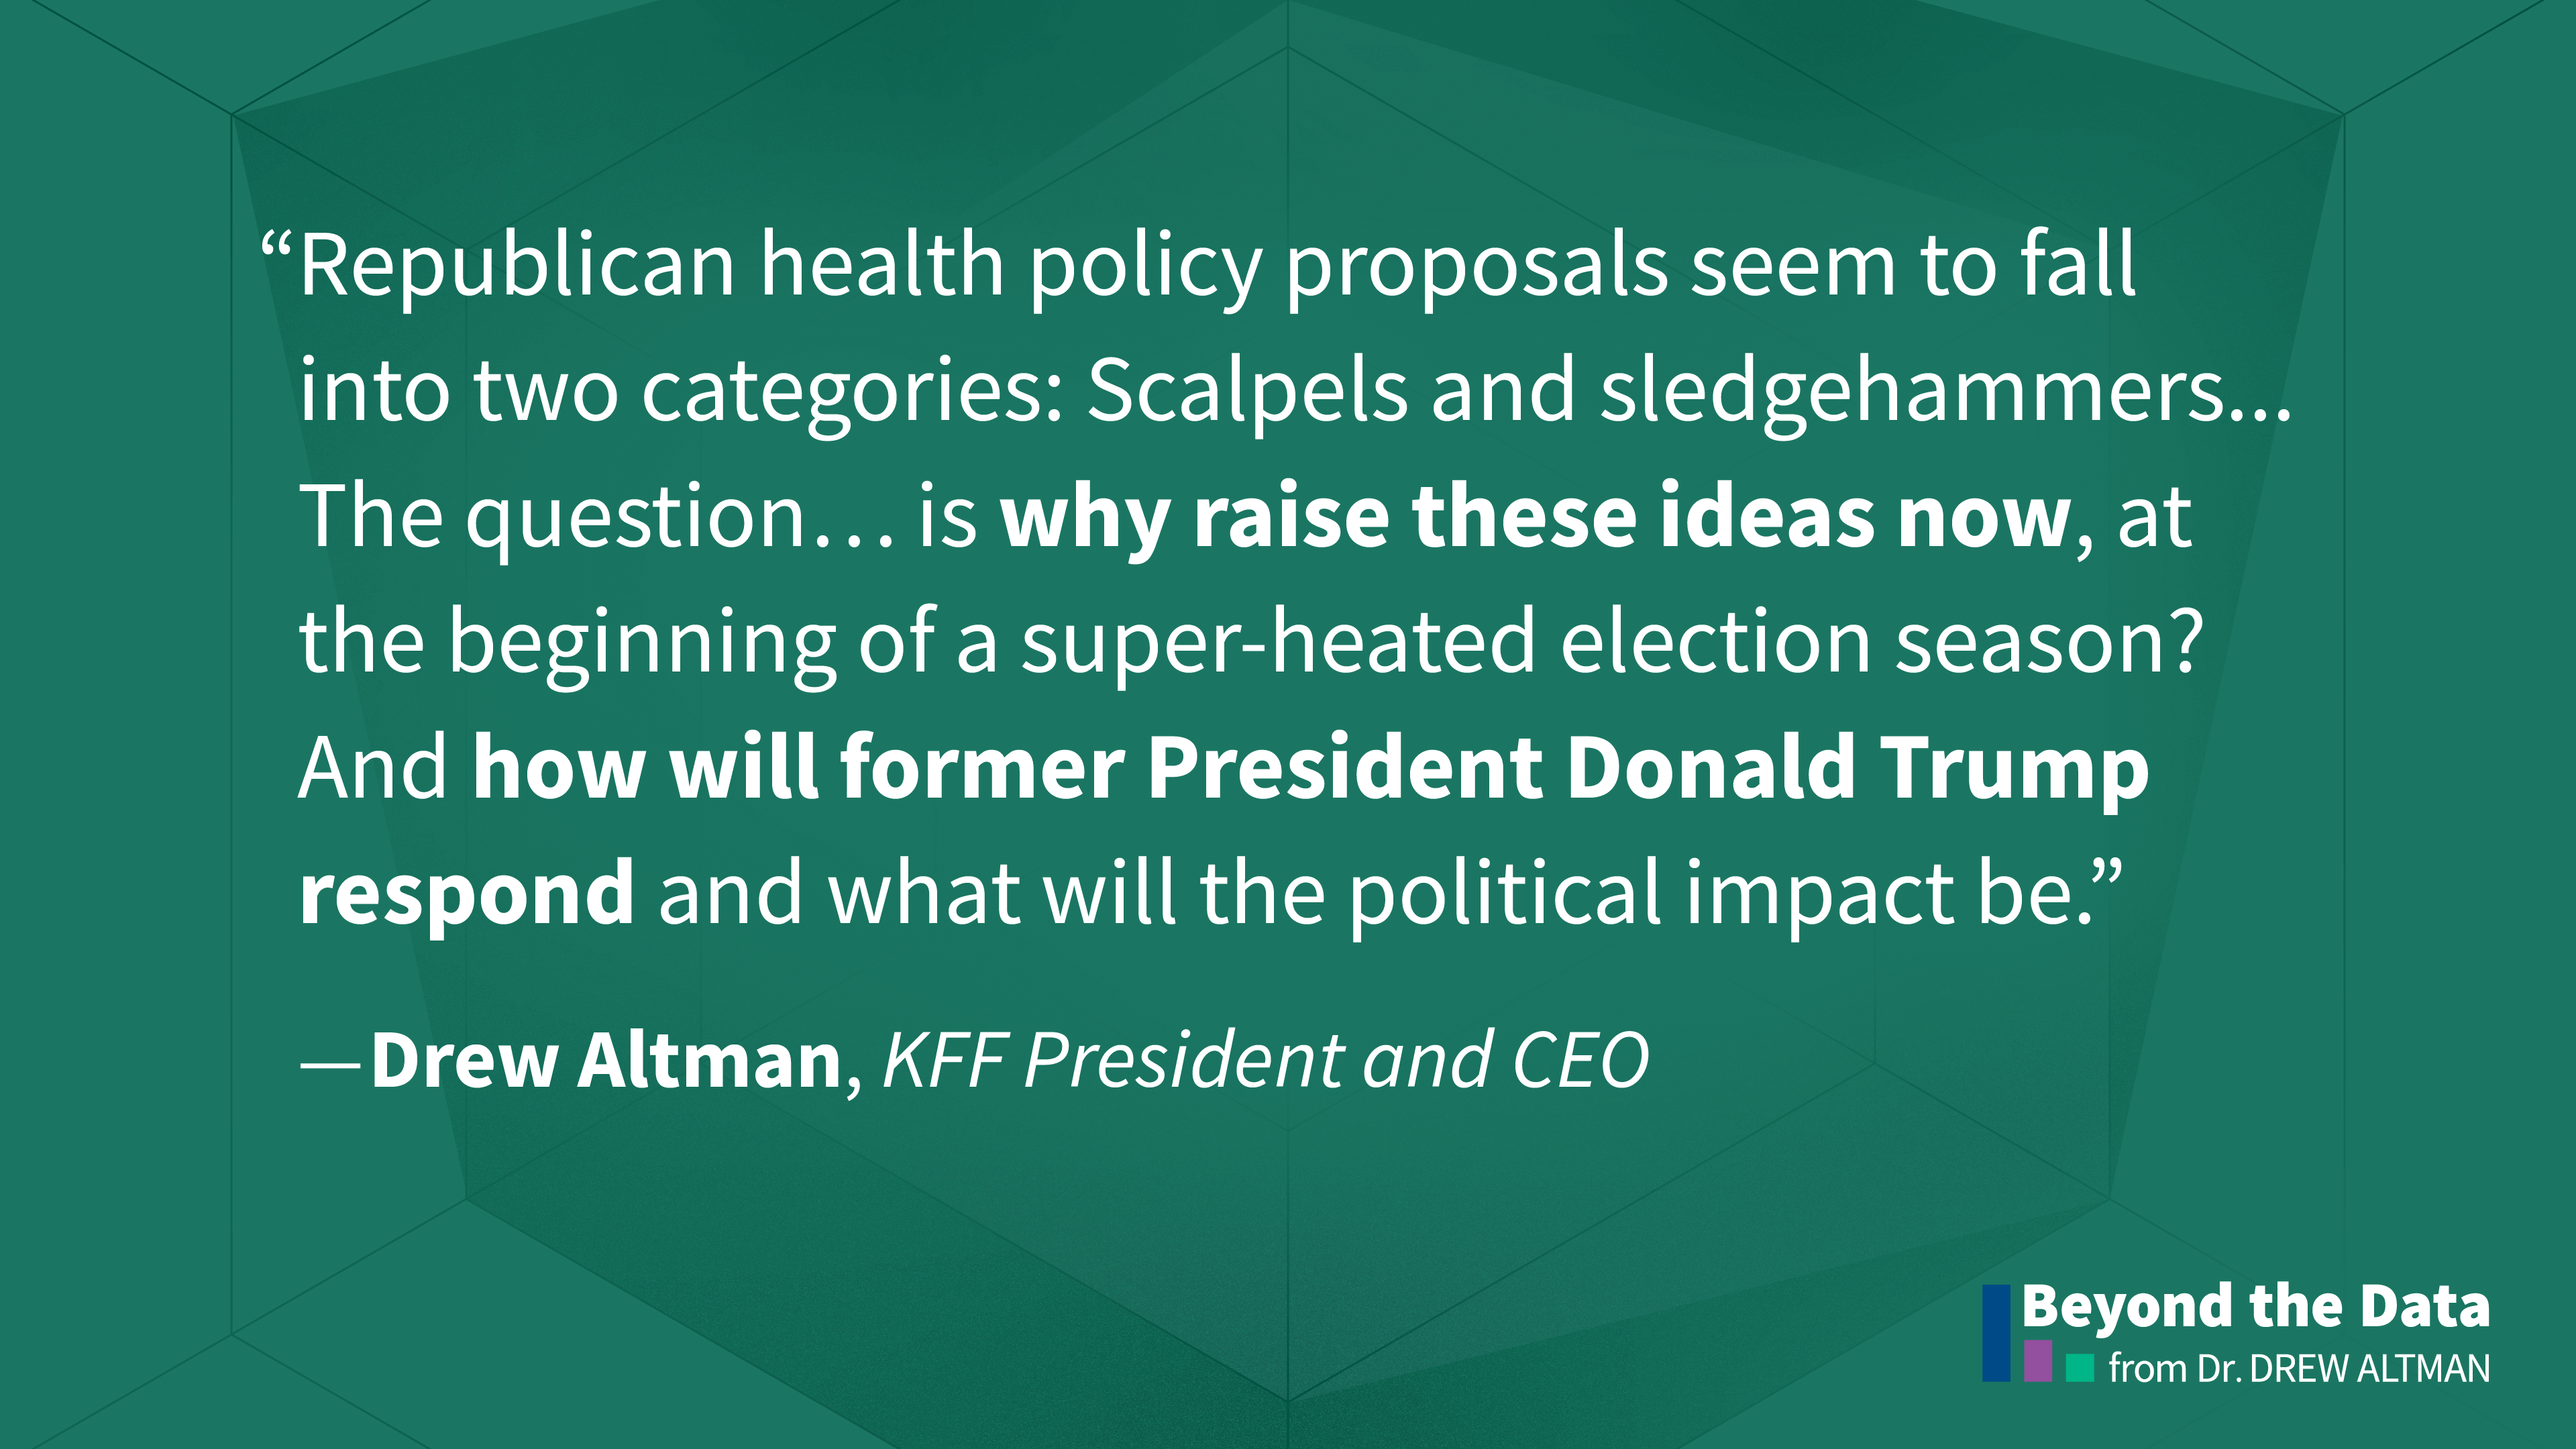 More on Health and Politics: The Special Timing of Republican Health Policy Plans |  KFF